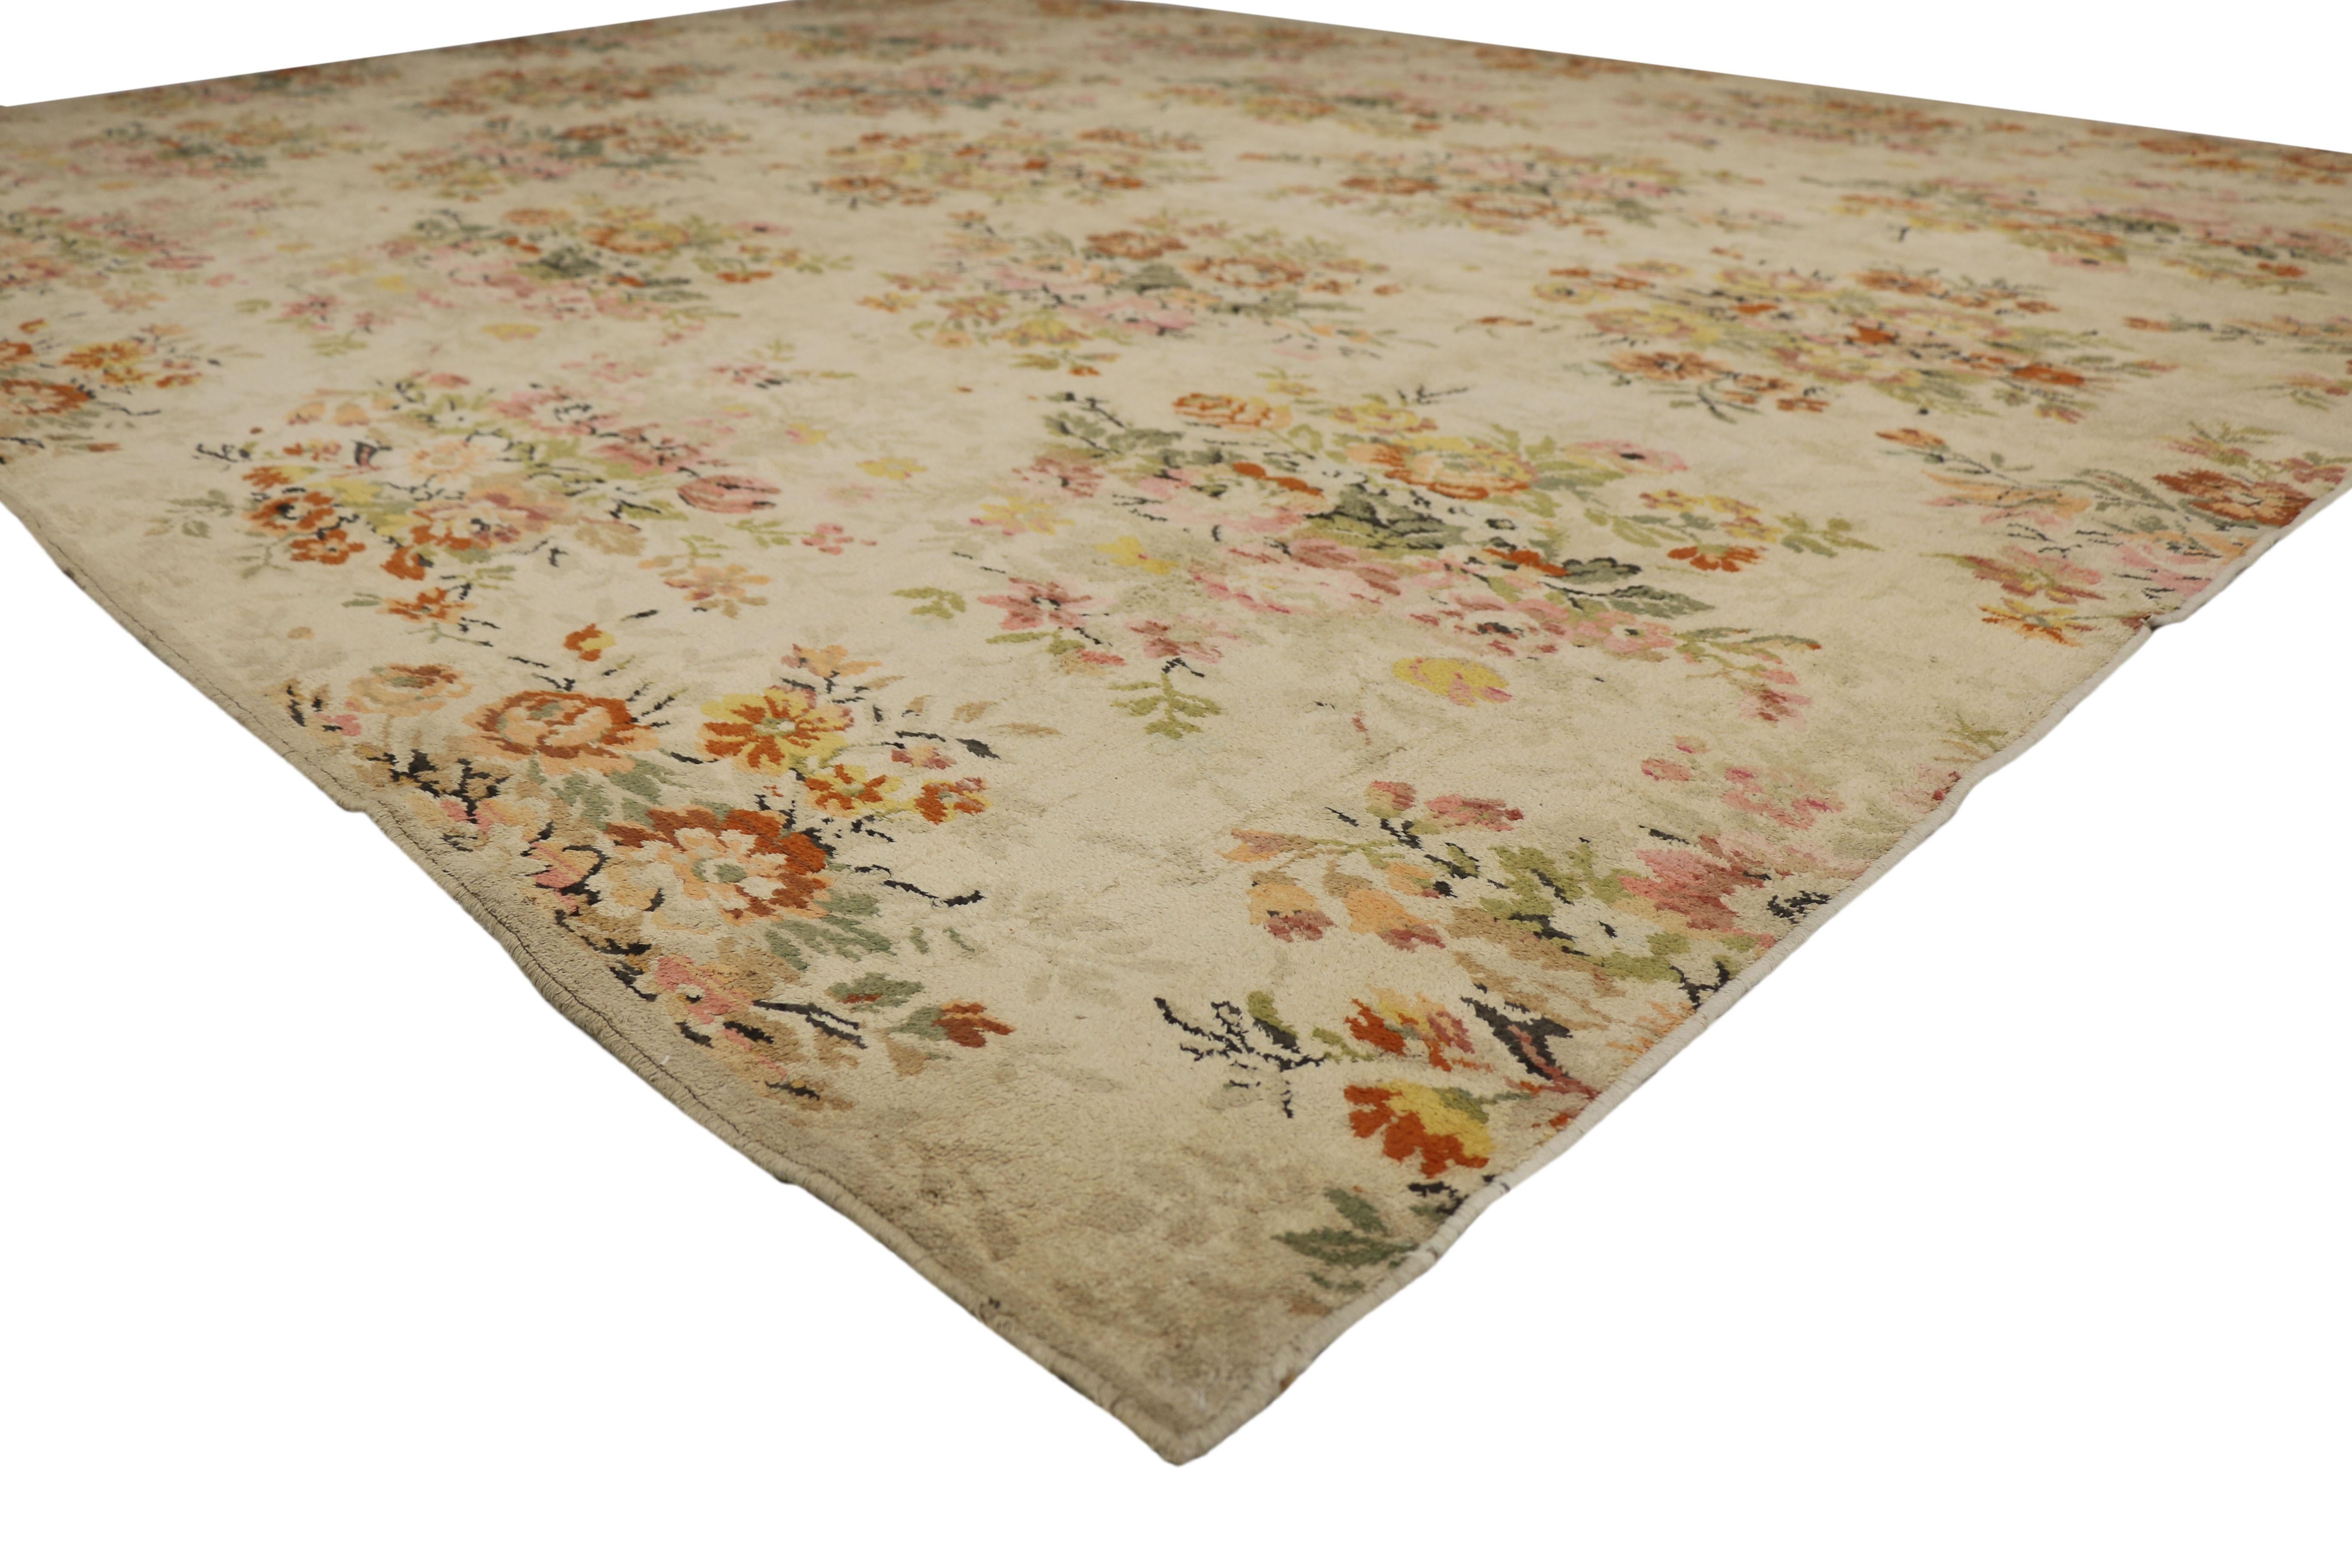 70715 Shabby Chic Vintage European Rose Bouquet Barkcloth Era Rug with Chintz Style. Drawing inspiration from Mario Buatta and Chintz style, this European style barkcloth rug beautifully showcases a timeless floral design. This shabby chic vintage